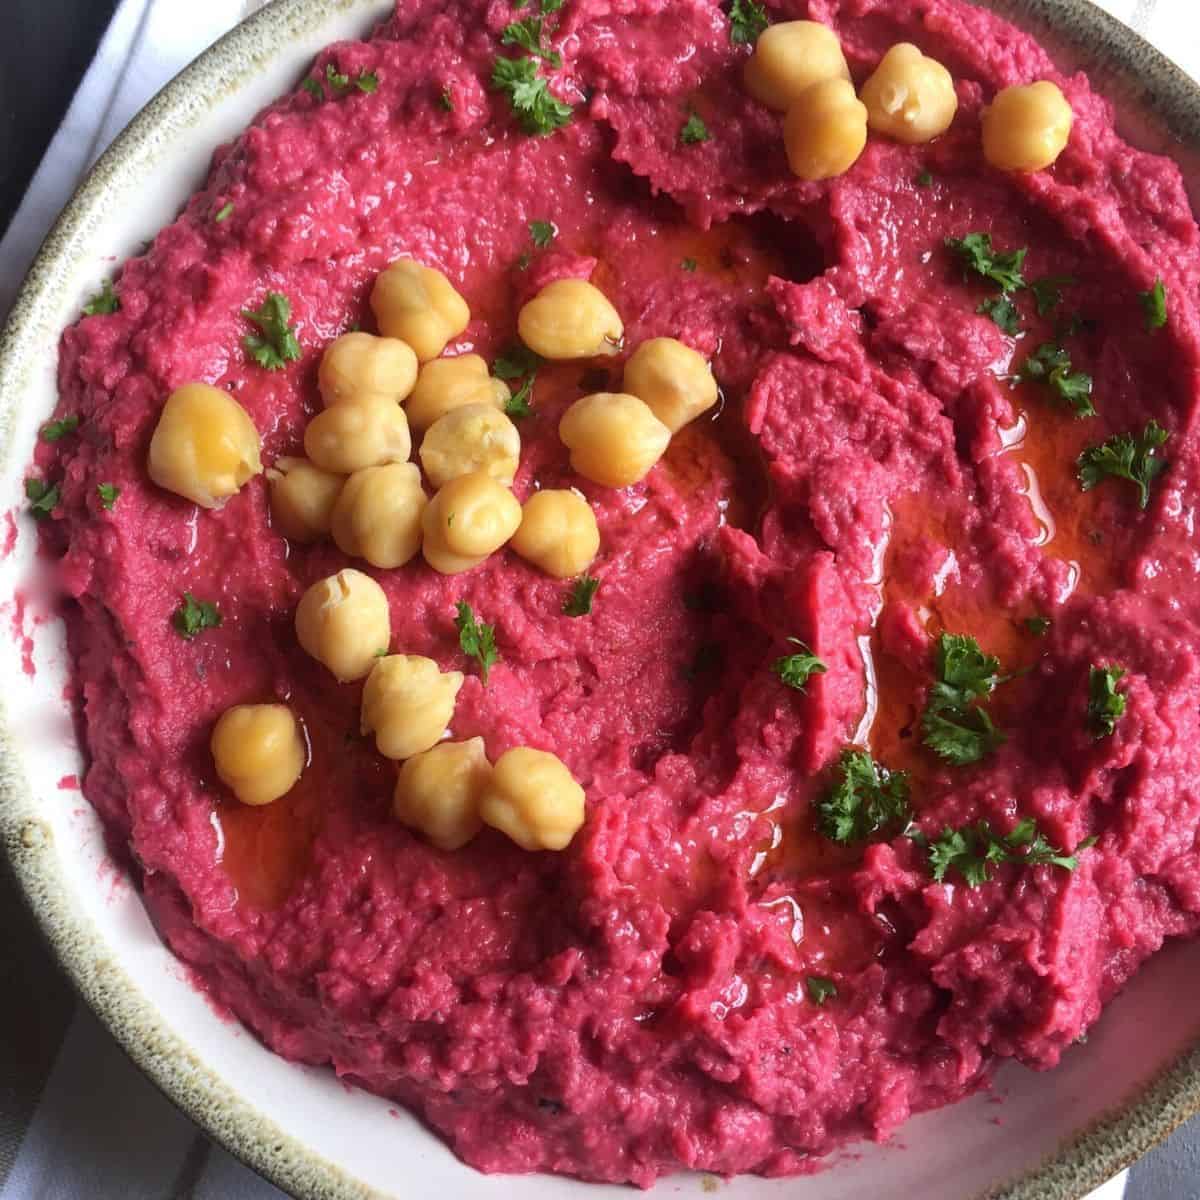 Bright bowl of roasted beetroot humus garnished with cooked chickpeas and olive oil, and with a basket of pita bread by the side